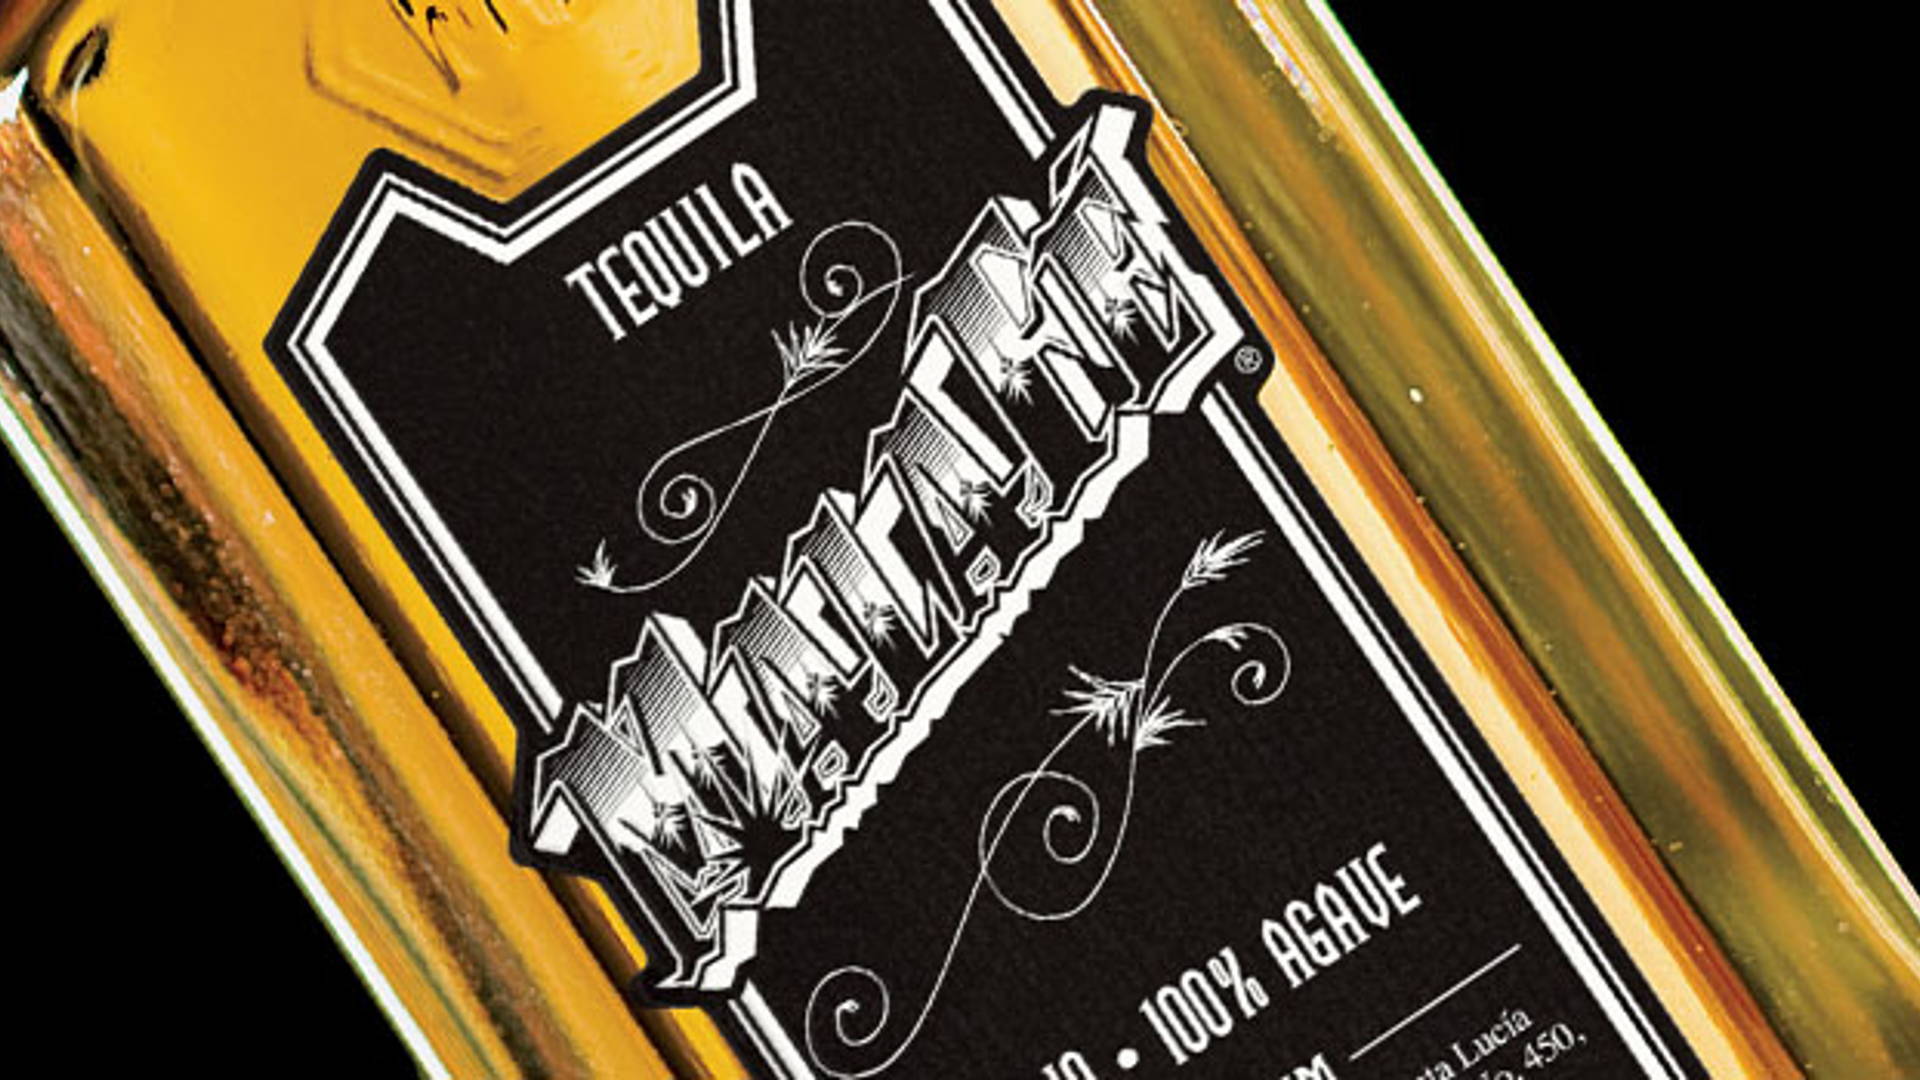 Featured image for Tequila Malafé